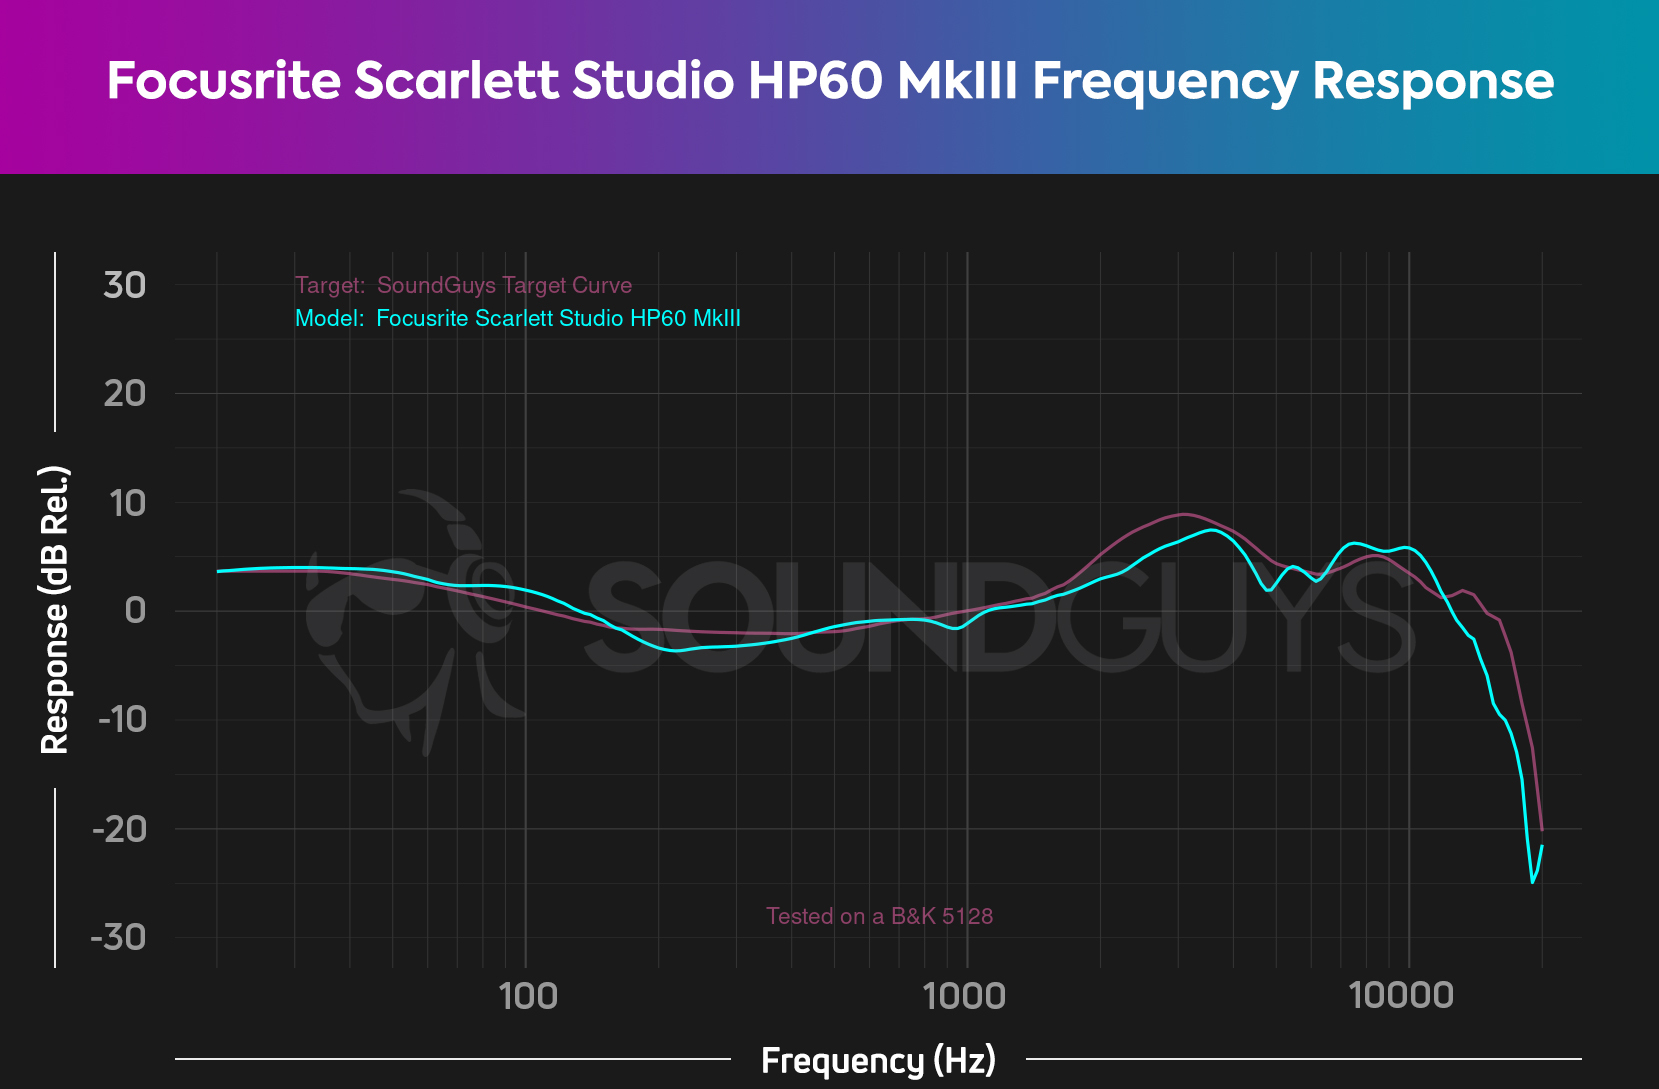 A chart showing the Focusrite Scarlett 2i2 Studio HP60 MkIII close adherence to the SoundGuys house curve.